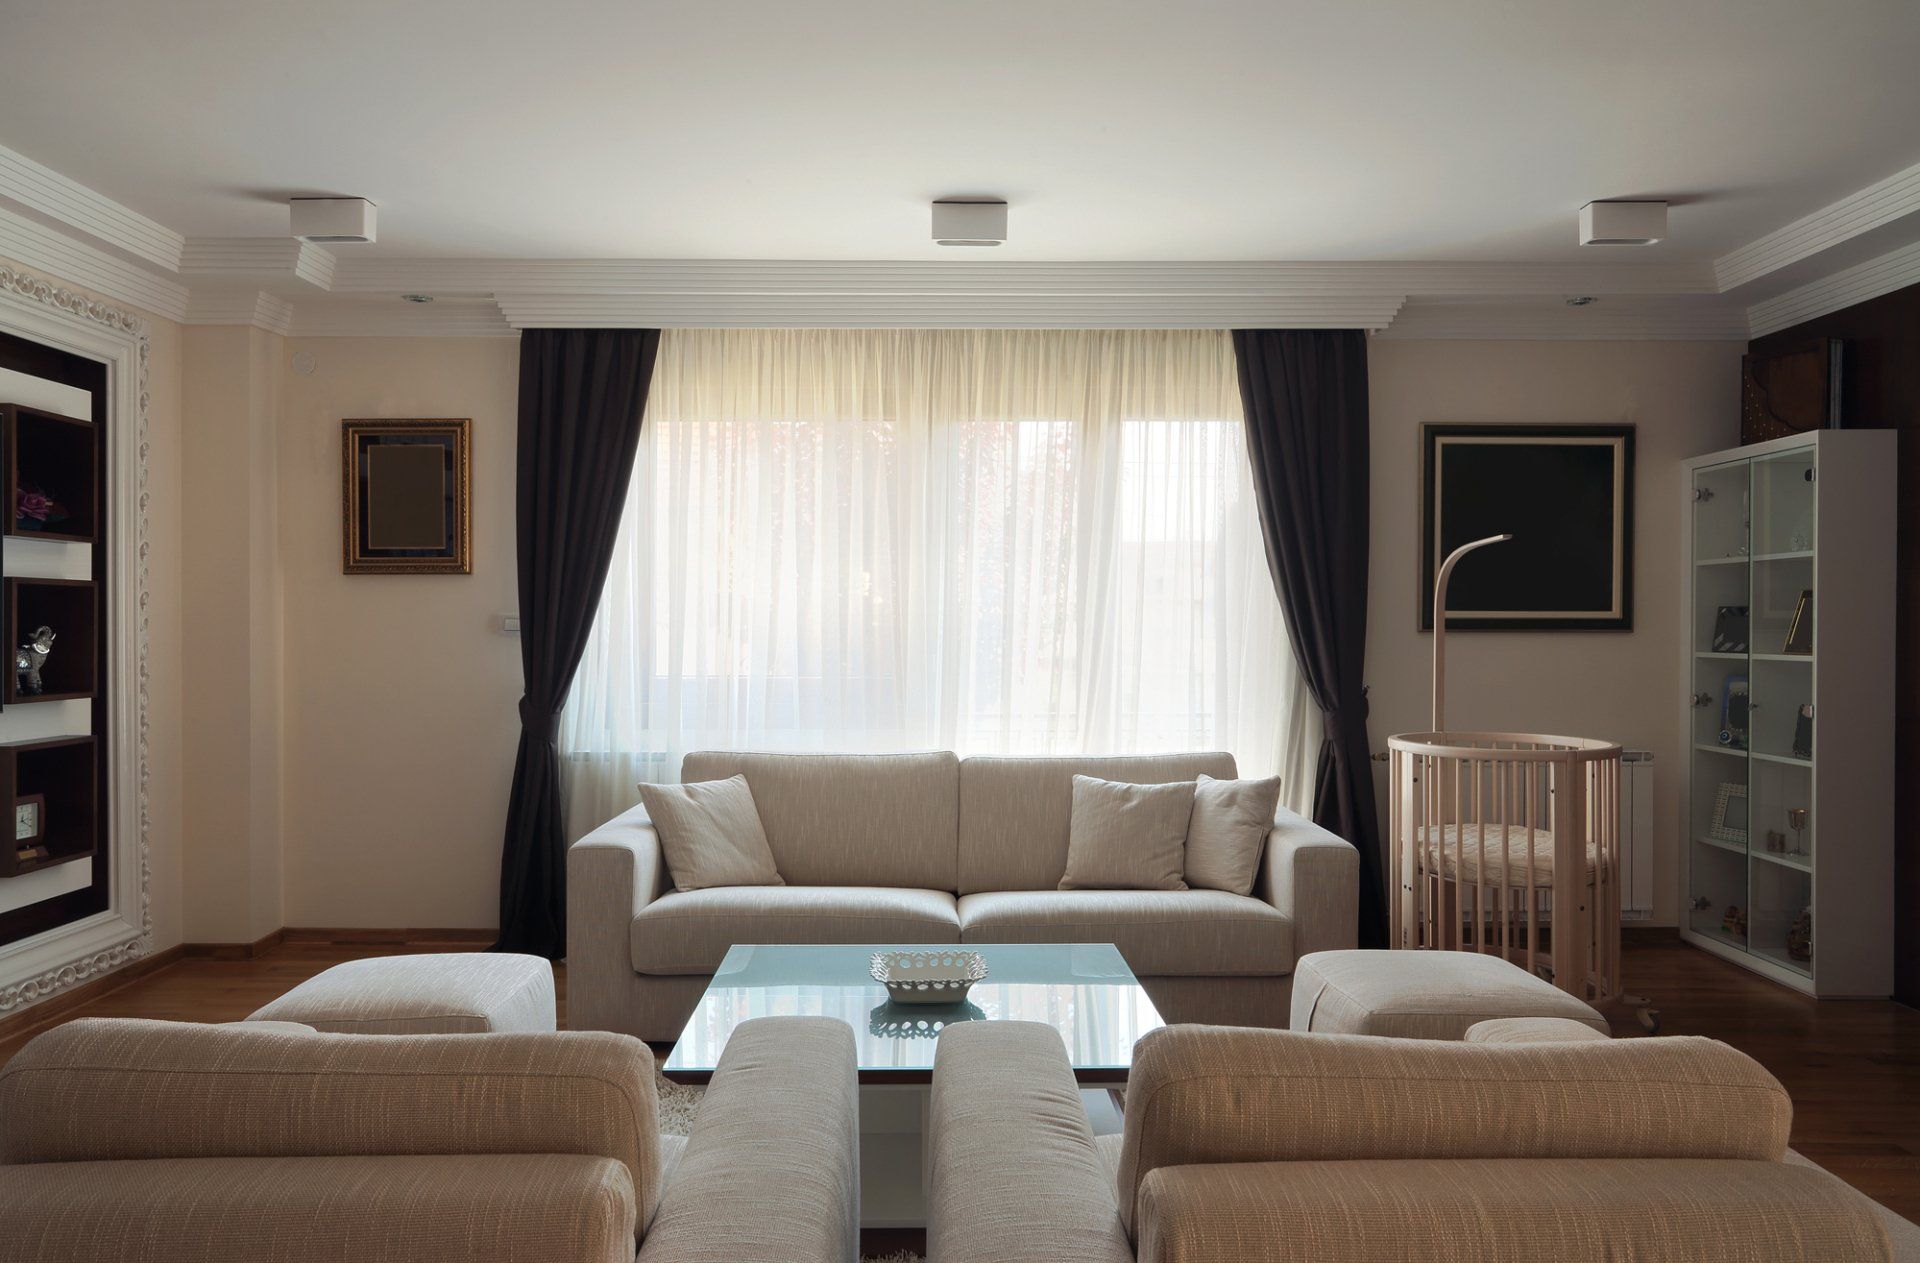 Neutral toned loungeroom with couch and chairs around coffee table. Dark formal curtains pulled tied back to expose white sheer curtains across window.